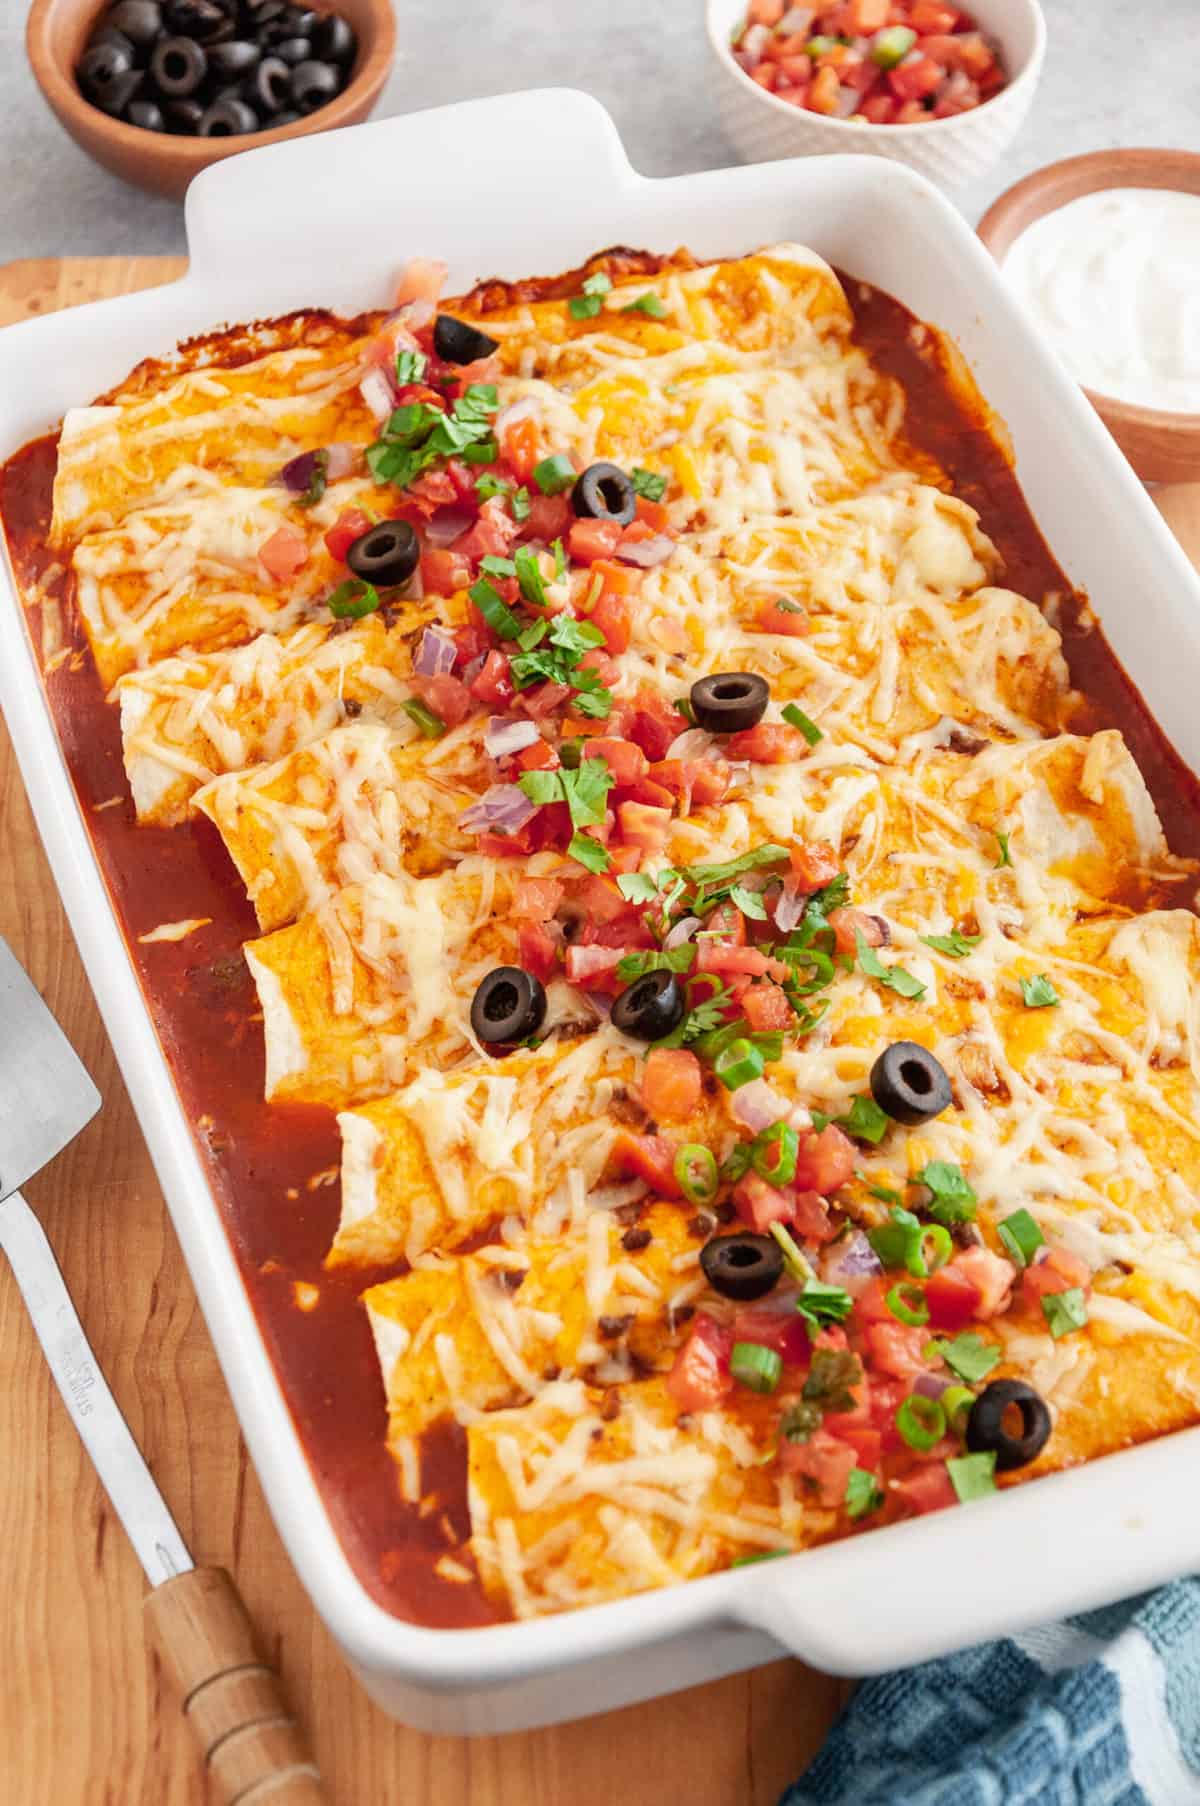 baked beef enchiladas served in a casserole dish topped with black olives, tomatoes, cilantro, green onions, shredded cheddar cheese, and red sauce